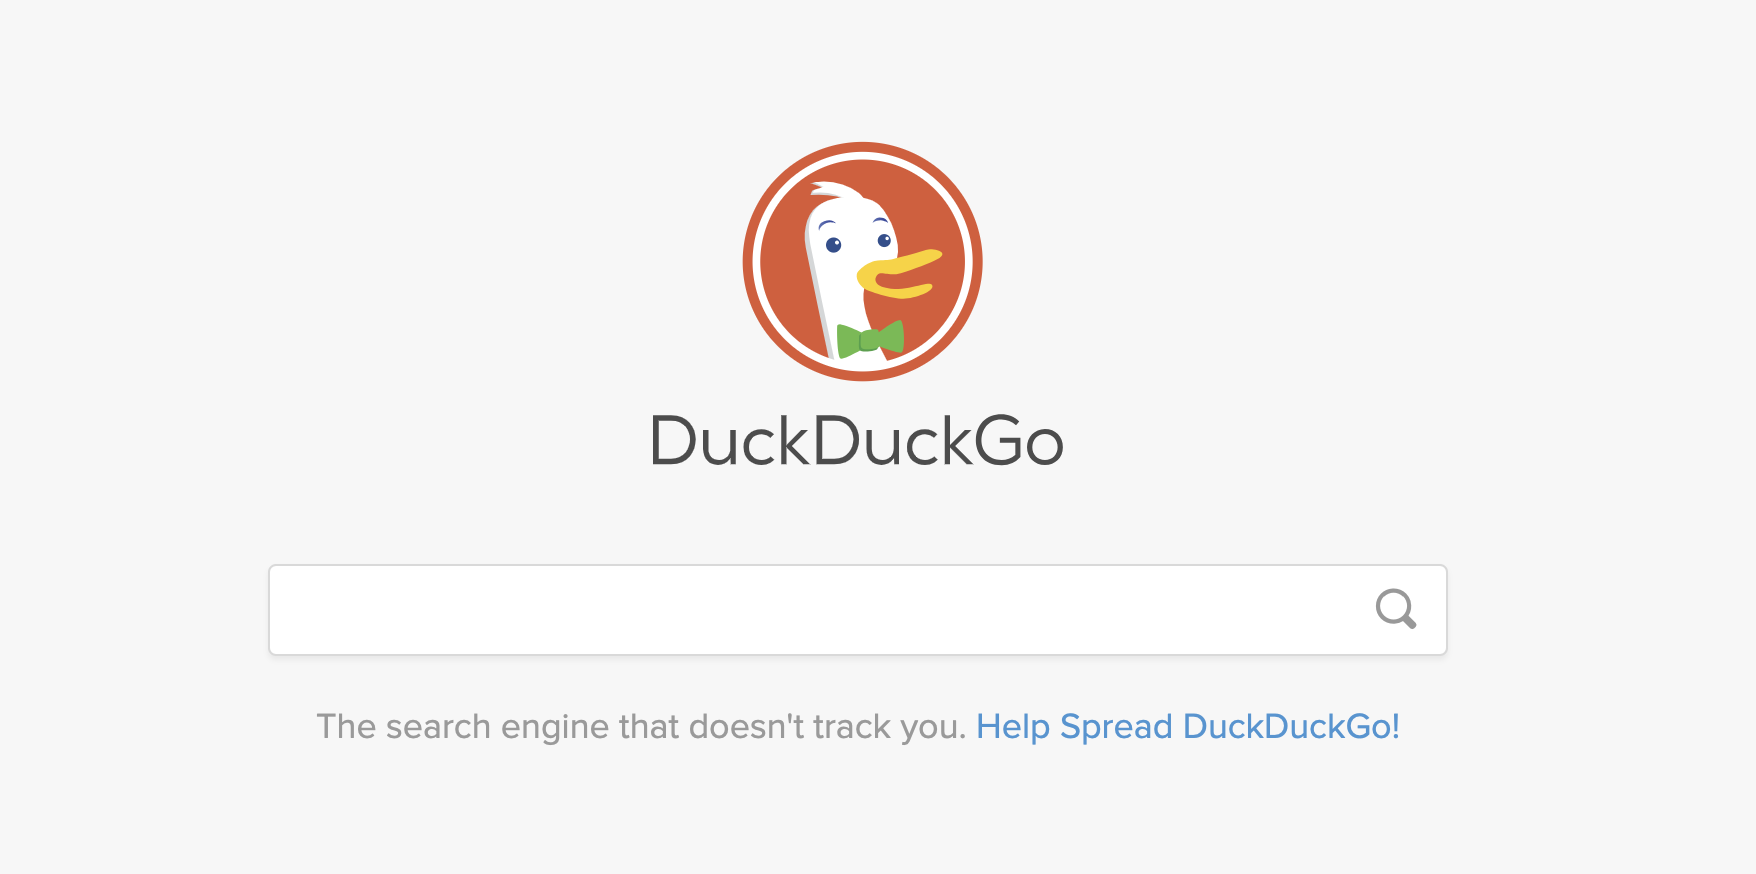 Is Duckduckgo Owned By Google